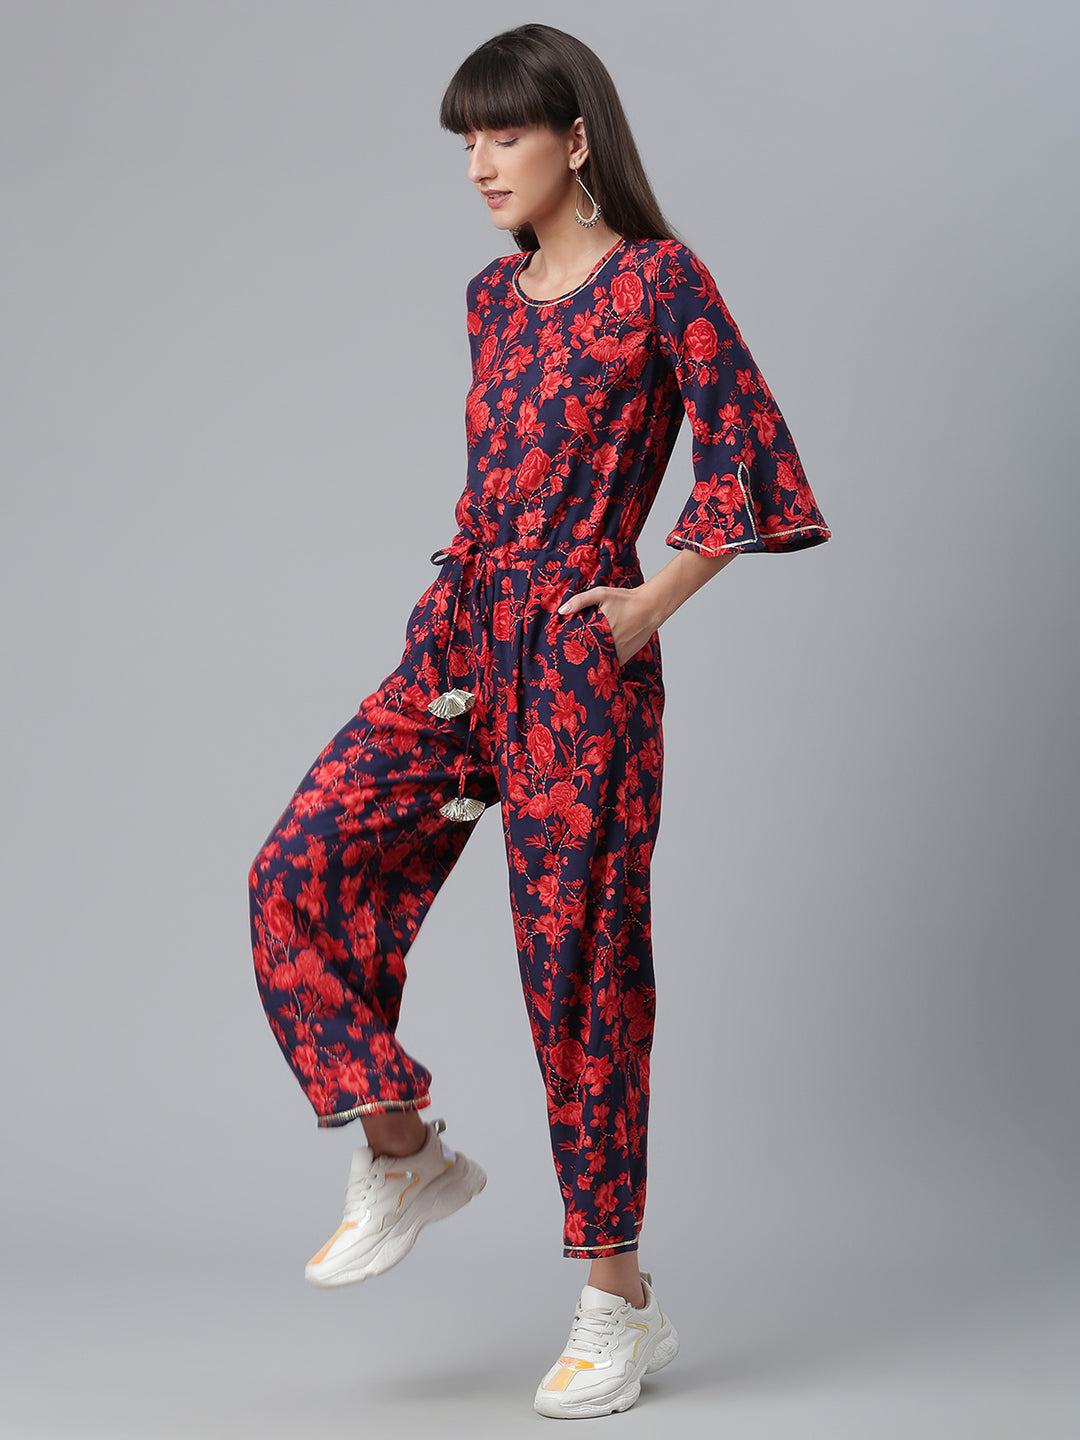 Women's Navy & Red Rayon Printed Jumpsuit - Ahalyaa